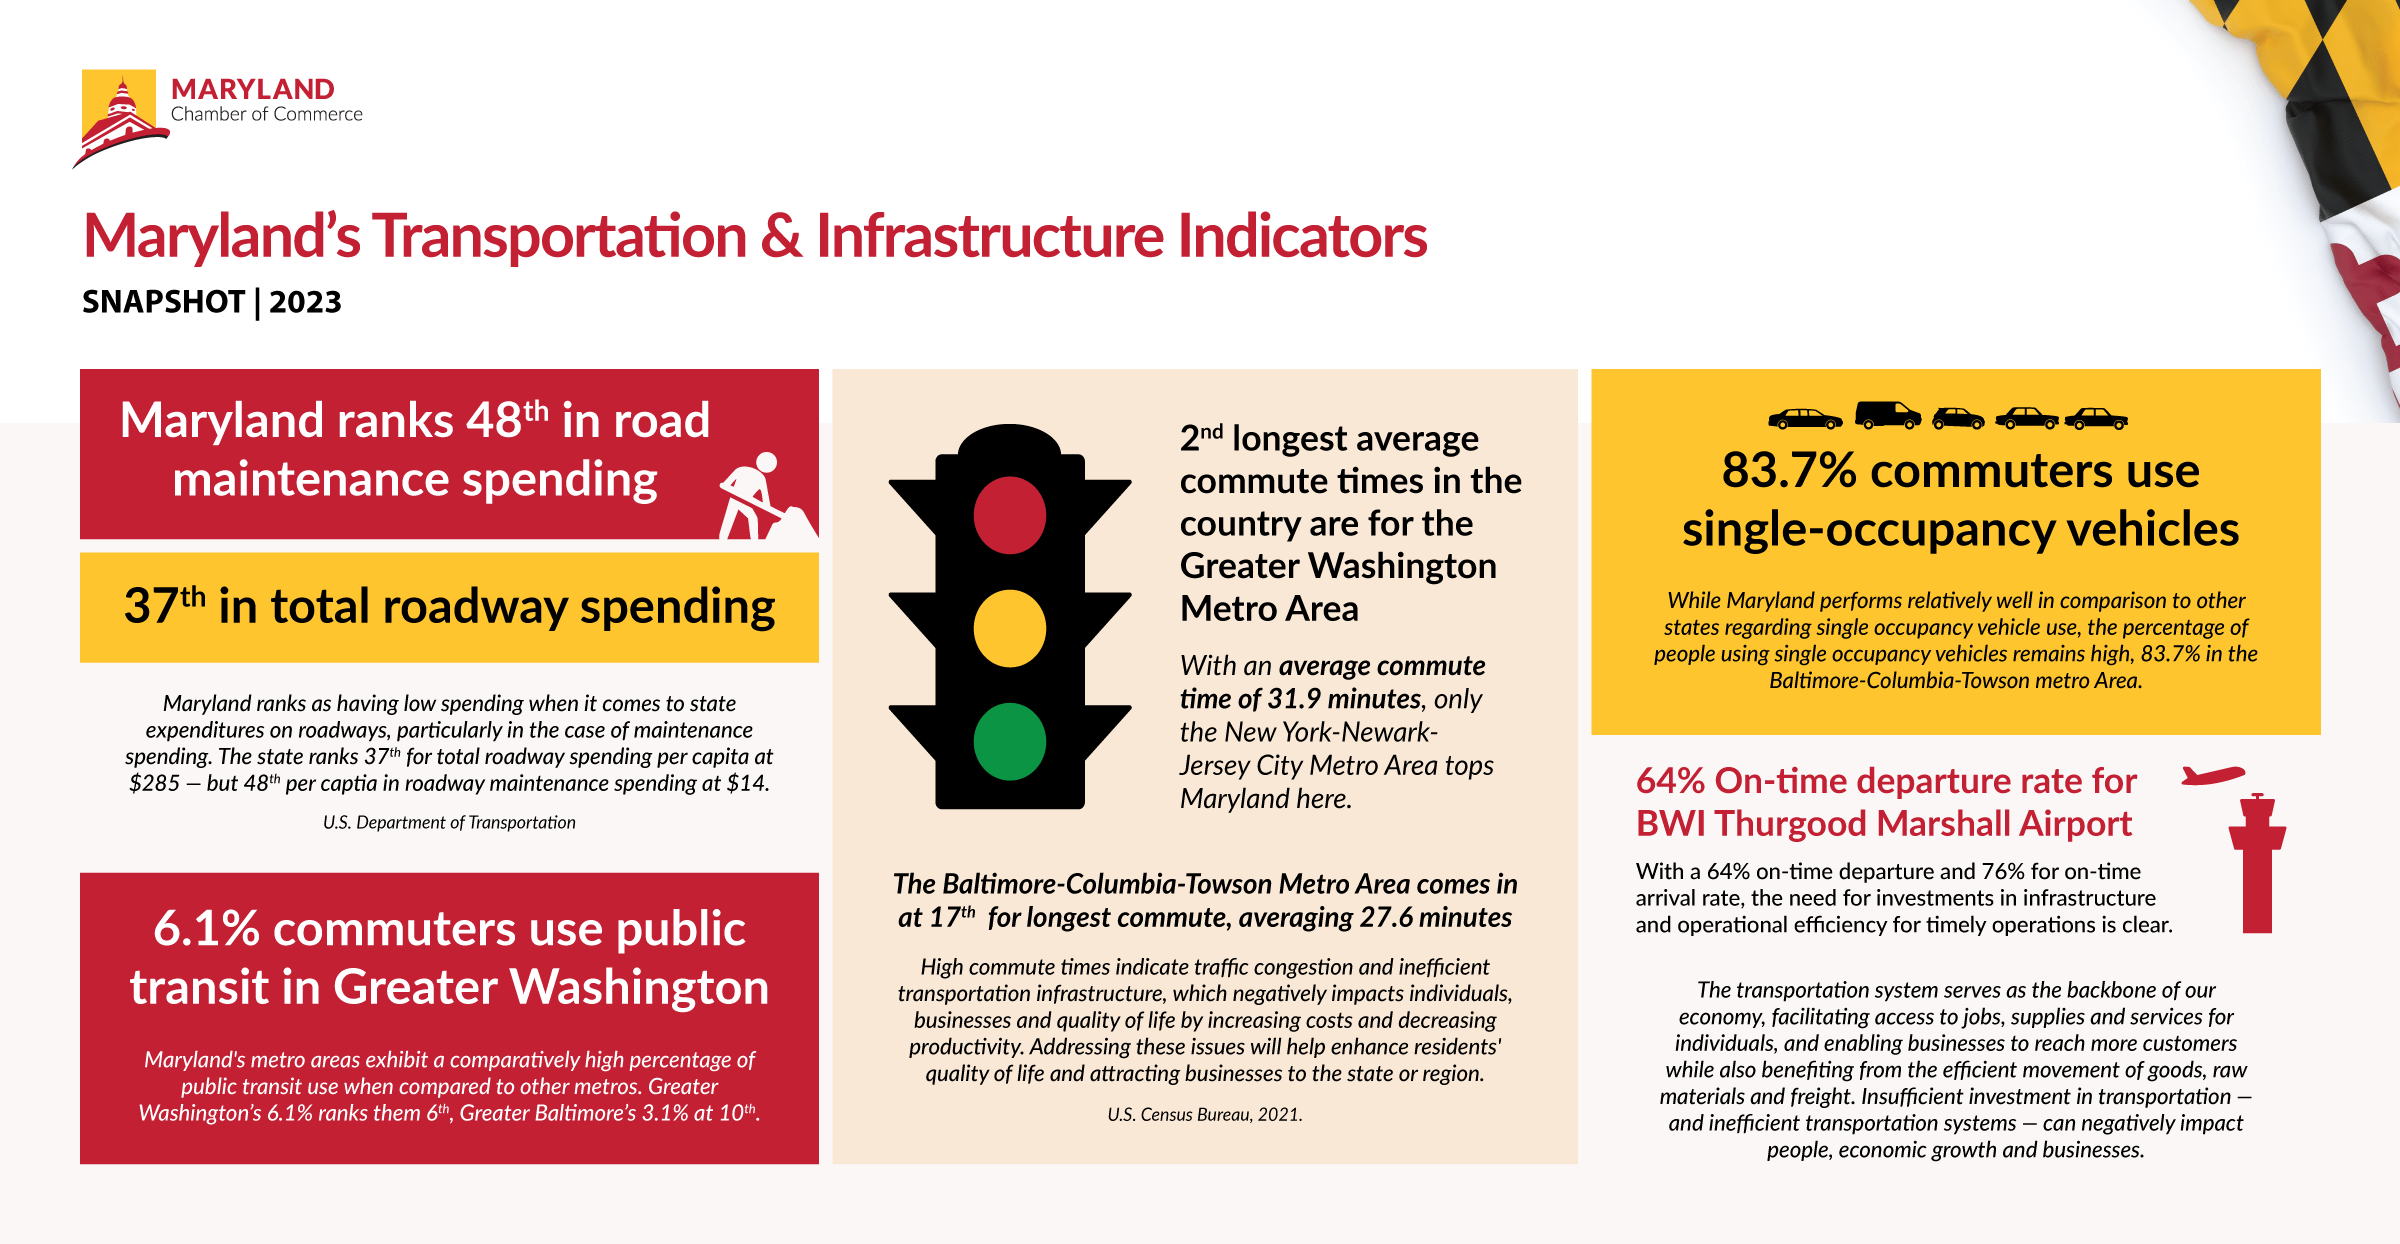 An infographic that demonstrates a variety of rankings regarding Maryland's transportation and infrastructure indicators vs. other states across the nation, including: Maryland ranks 48th in road maintenance spending and 37th in total roadway spending. Maryland ranks as having low spending when it comes to state expenditures on roadways, particularly in the case of maintenance spending. The state ranks 37th for total roadway spending per capita at $285 - but 48th per capita in roadway maintenance spending at $14. 6.1% of commuters in the Greater Washing Metro Area make use of public transit, ranking 6th. Maryland's metro areas exhibit a comparatively high percentage of public transit use when compared to other metros. Greater Washington's 6.1% ranks them 6th, 3.1% of Baltimore-Columbia-Towson Metro Area commuters use public transit, ranking 10th. In 2021, the Greater Washington Metro Area had the 2nd longest commute times in the country at an average duration of 31.9 minutes. Only the New York-Newark-Jersey City Metro Area had longer. The Baltimore-Columbia-Towson Metro ranked 17th at an average time of 27.6 minutes. High commute times indicate traffic congestion and an inefficient transportation infrastructure, which negatively impact individuals, businesses, and quality of life by increasing costs and decreasing productivity. Addressing these issues will help enhance residents’ quality of life and attracting businesses to the state or region. 83.7% of commuters use single-occupancy vehicles. While Maryland performs relatively well in comparison to other states regarding single occupancy vehicle use, the percentage of people using single occupancy vehicles remains high. 64% on-time departure rate for BWI Thurgood Marshall Airport. With a 64% on-time departure and 76% on-time arrival rate, the need for investments in infrastructure and operational efficiency for timely operations is clear. The transportation system serves as the backbone of our economy, facilitating access to jobs, supplies and services for individuals, and enabling businesses to reach more customers while also benefiting from the efficient movement of goods, raw materials and freight. Insufficient investment in transportation - and inefficient transportation systems - can negatively impact people, economic growth and business.